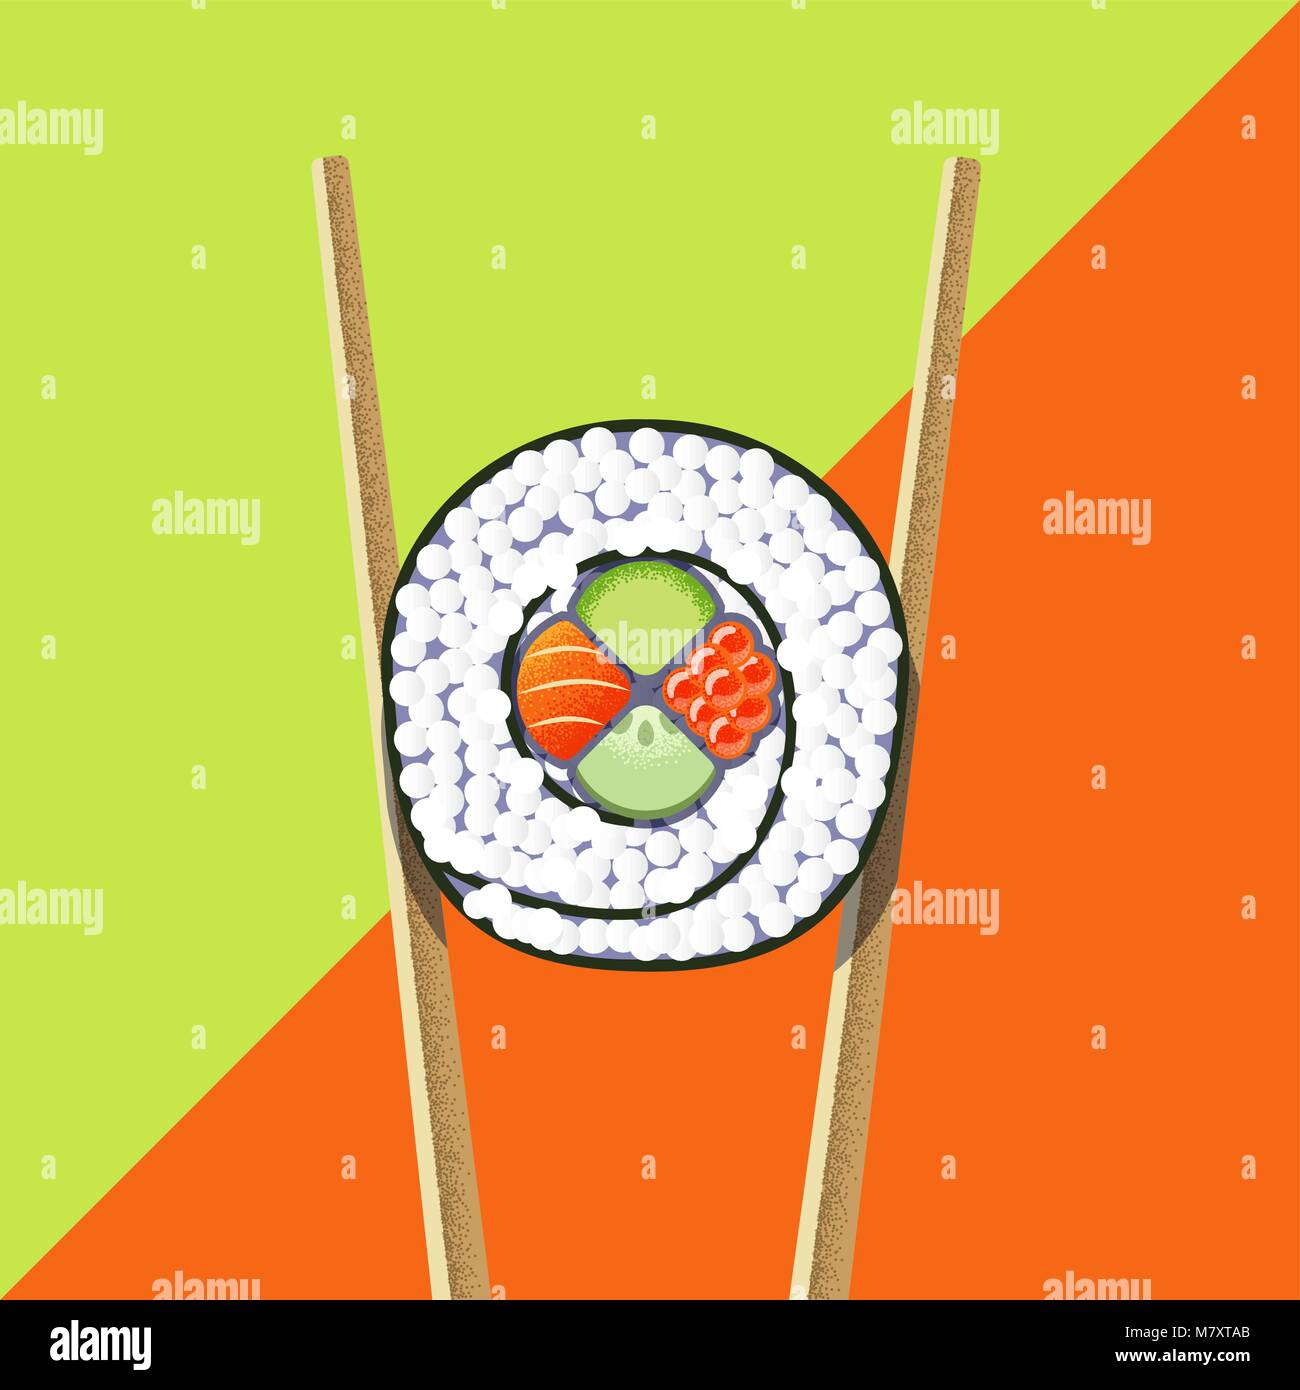 Vector illustration of sushi roll with two chopsticks on the bright green and orange background. Flat geometric design and textures. Stock Vector